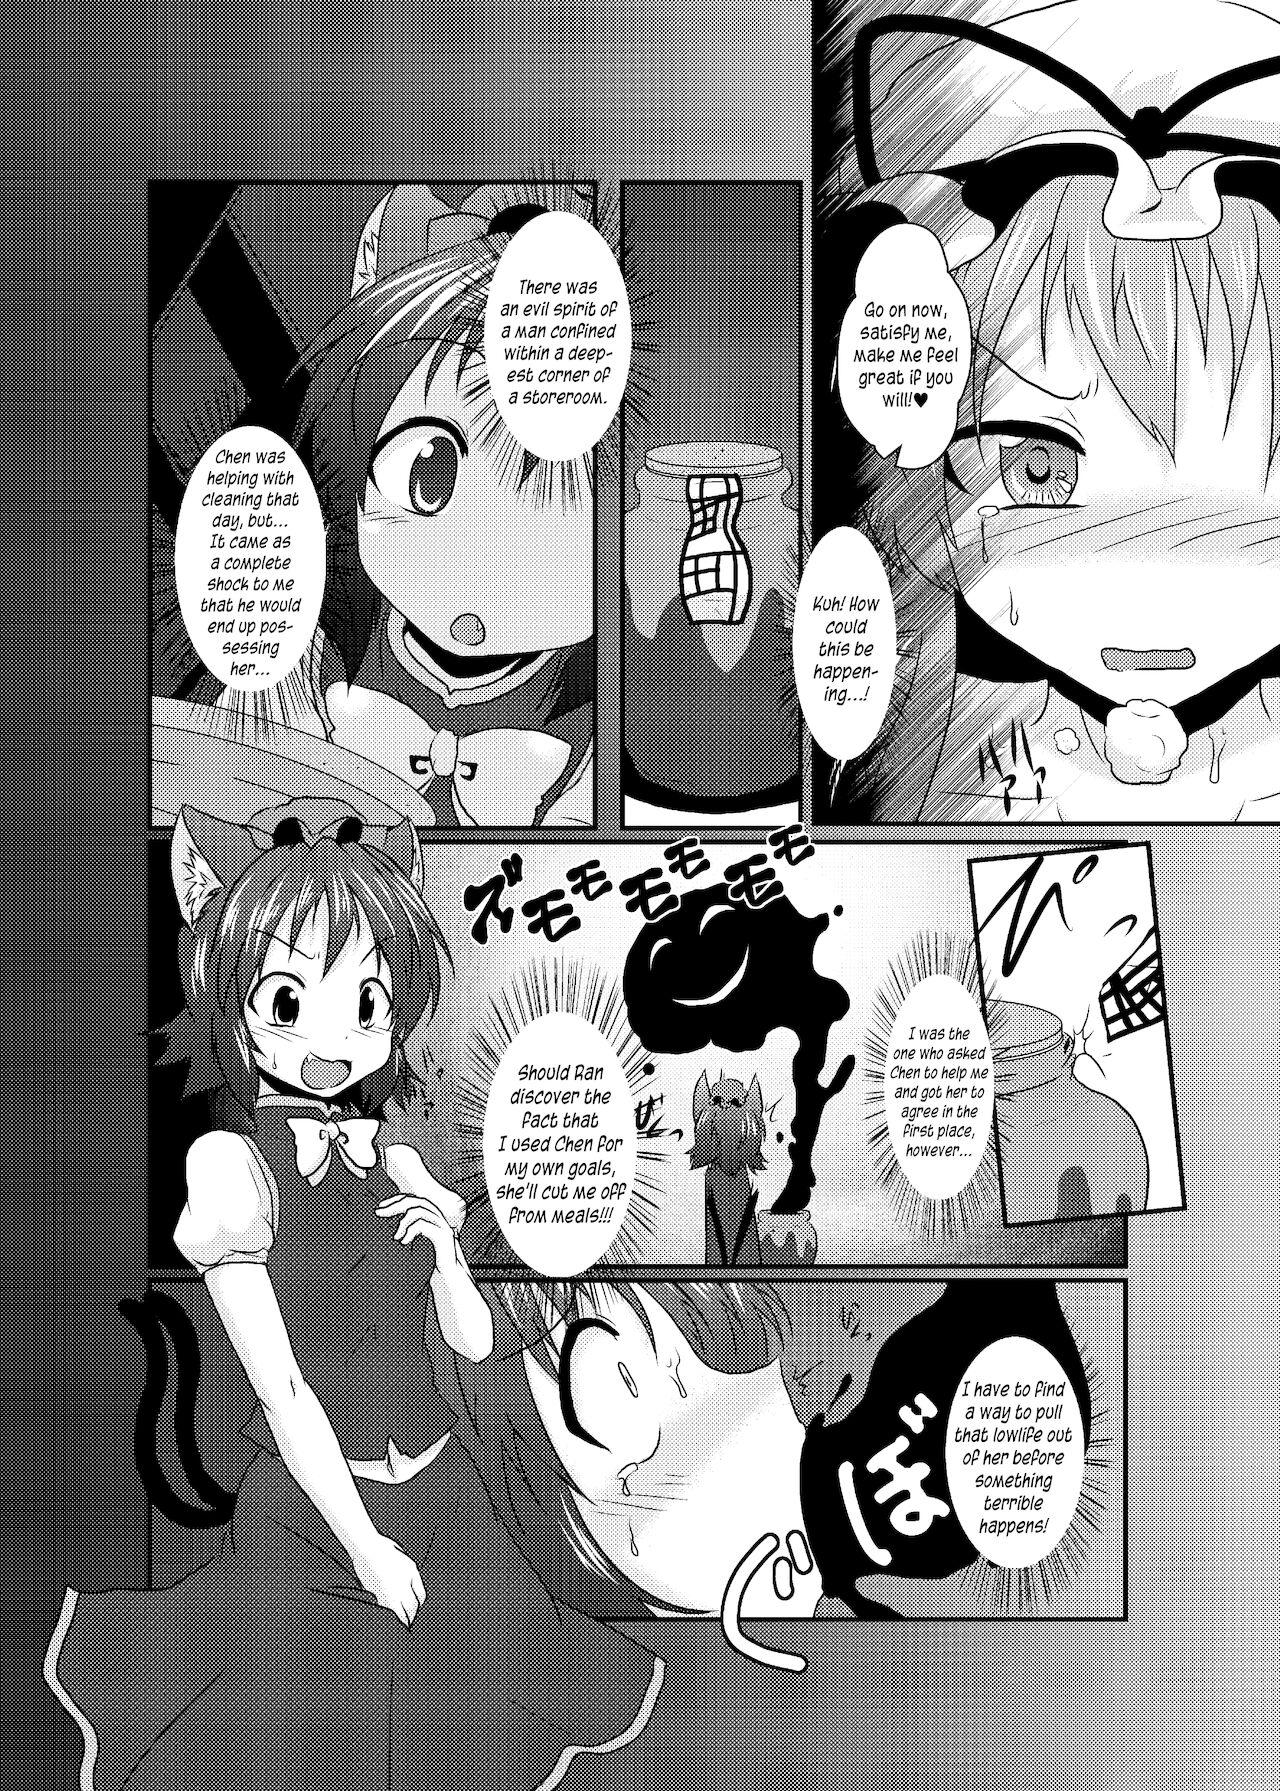 Public Nudity Chotto Tsukarechatta Mitai | I think I'm a little possessed! - Touhou project Blow Job - Page 4